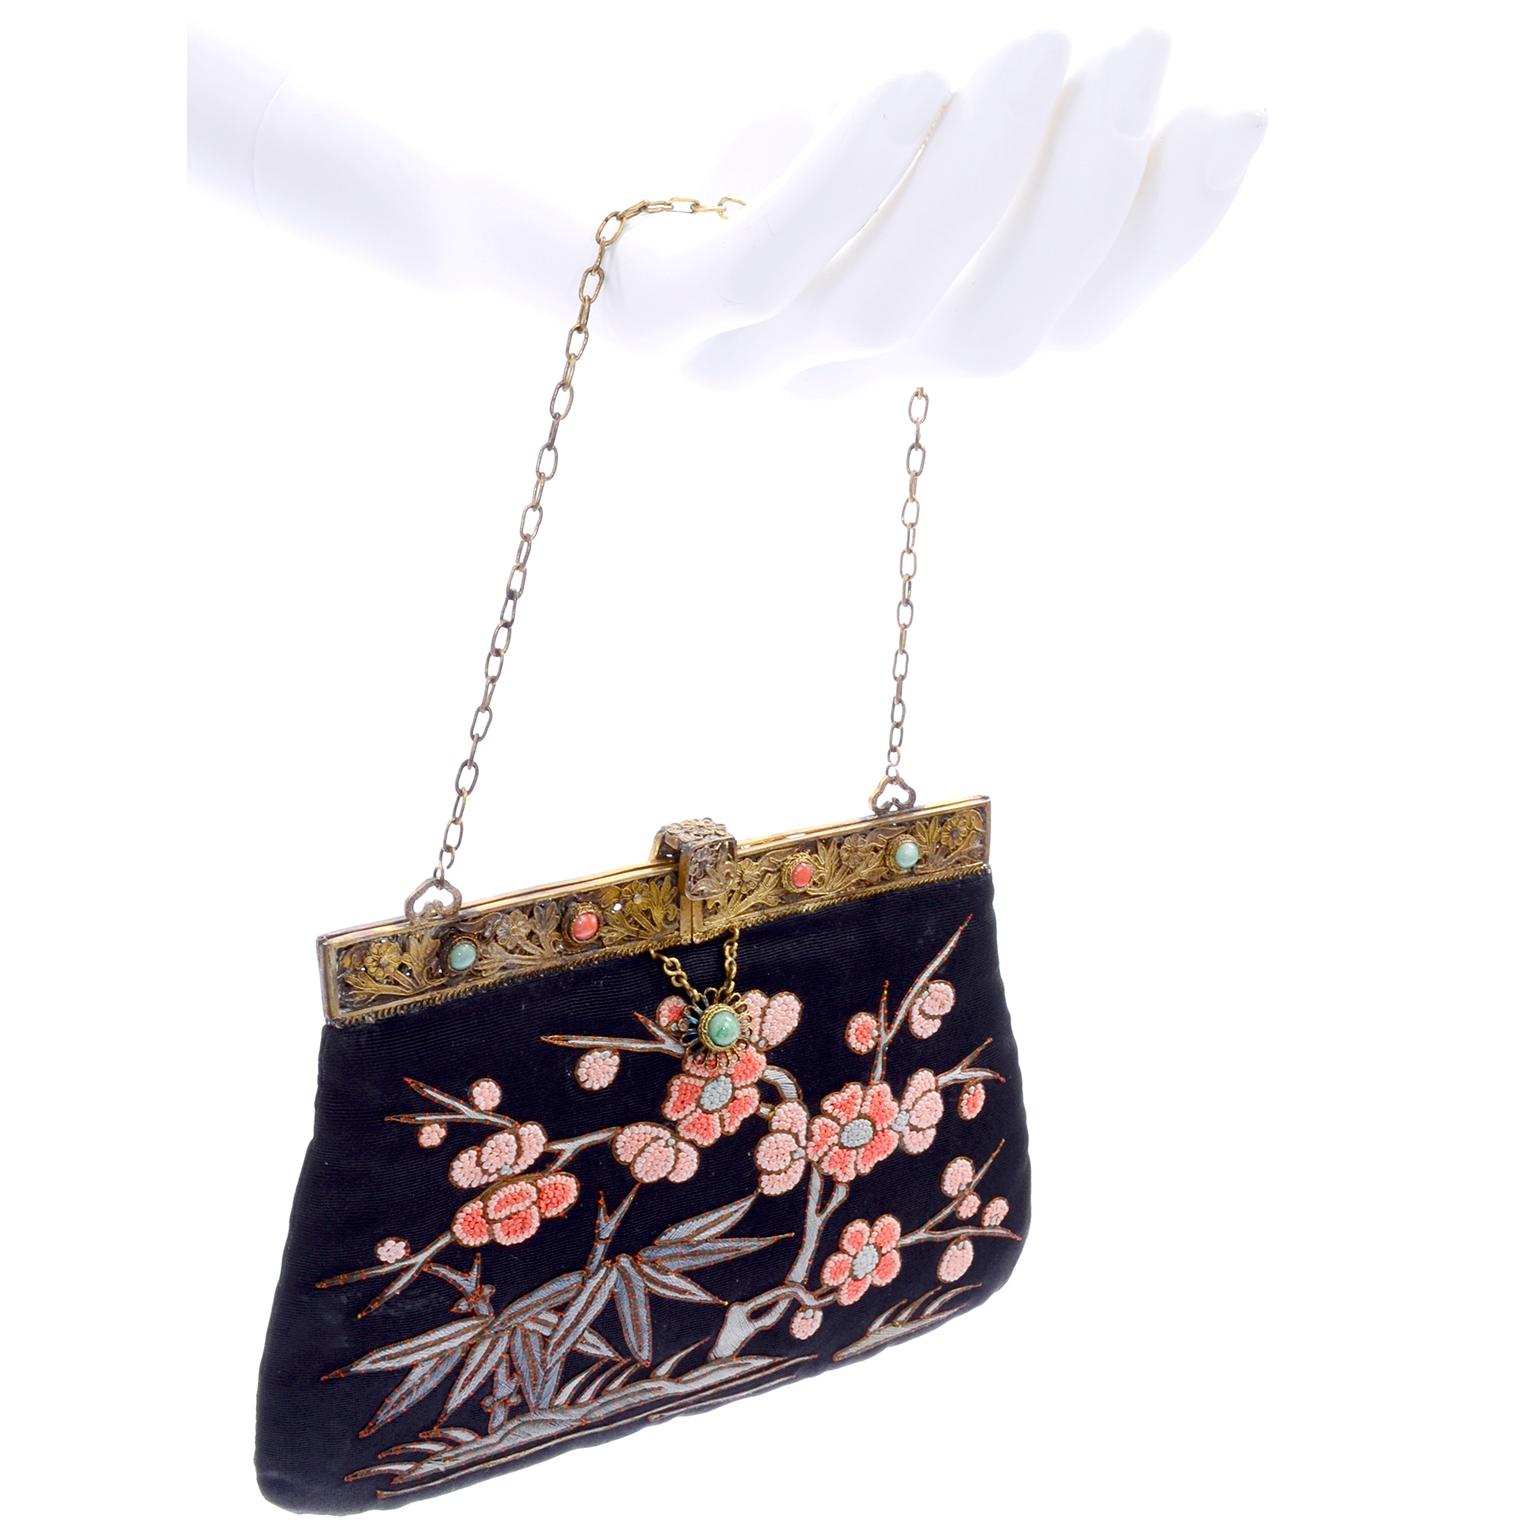 This is such an incredible antique handbag in black with embroidered leaves and flowers. The flowers are done with the 